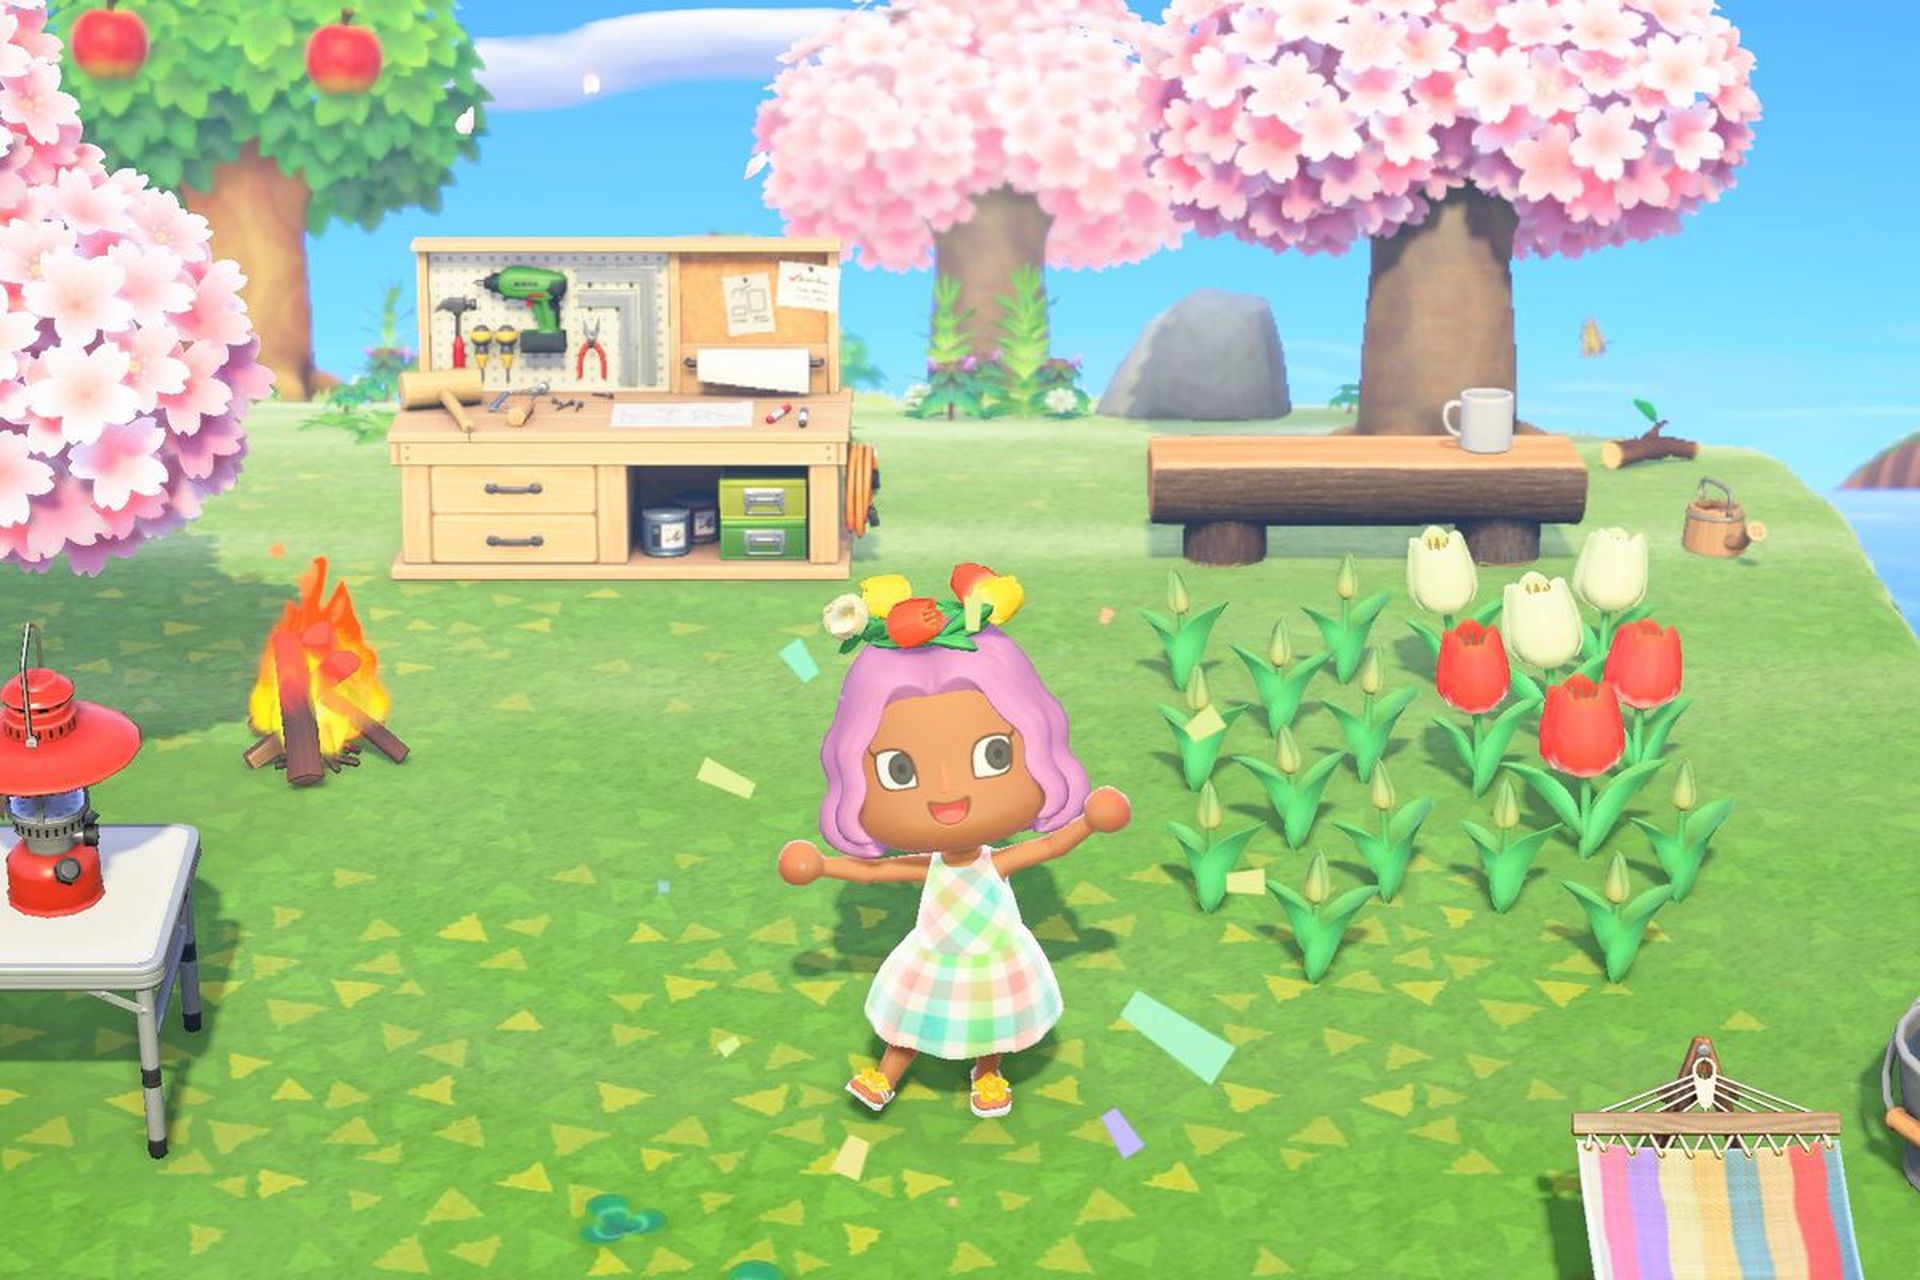 In this article, we are going to be covering how to get Ladder in Animal Crossing: New Horizons, so you can access areas in the game that are out of reach.